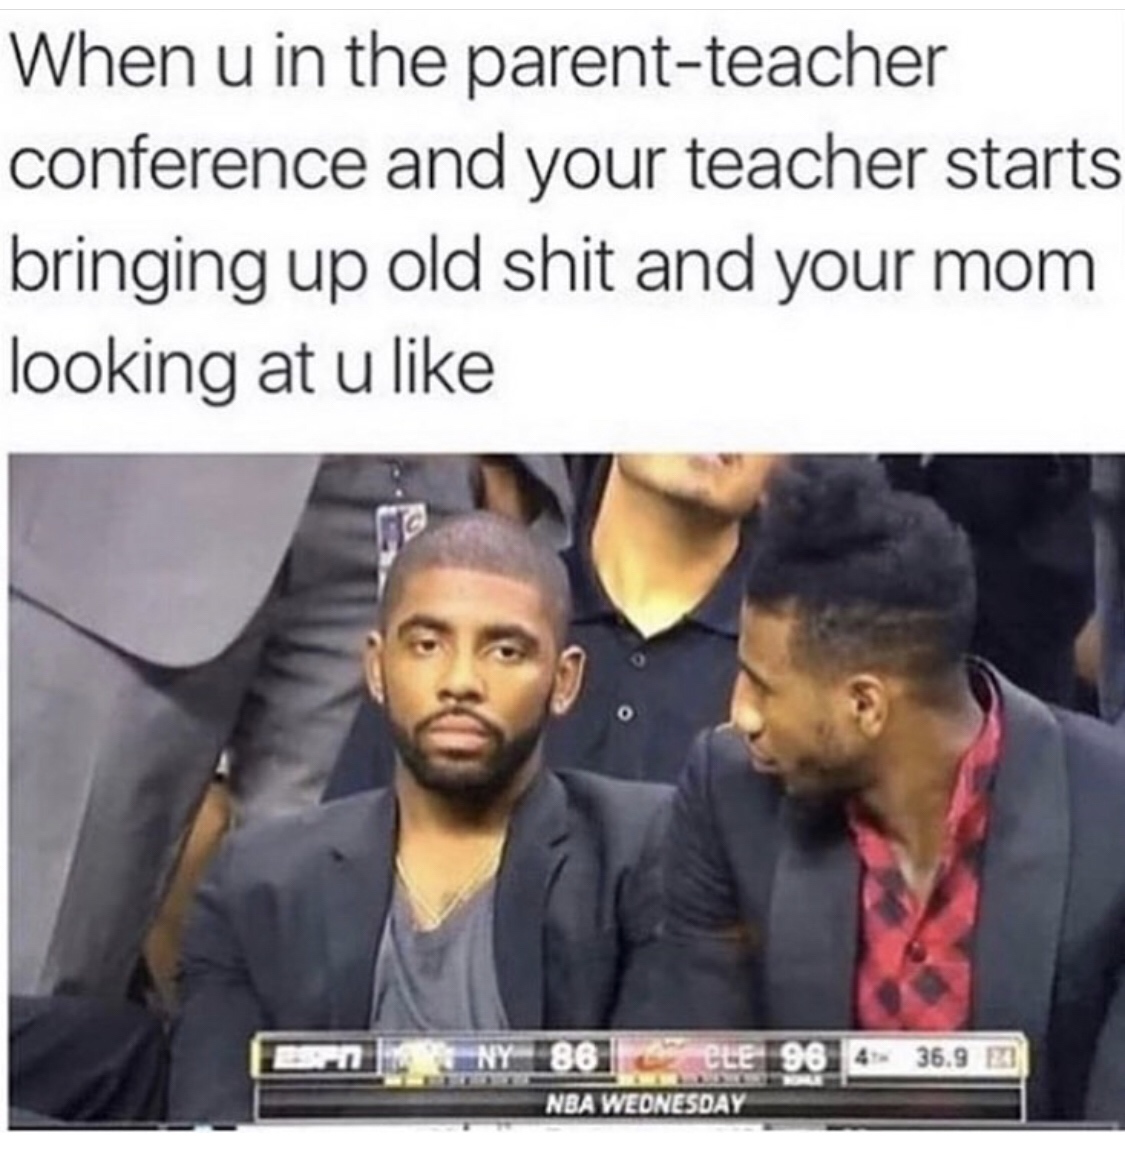 your parents look at you during parent teacher conferences - When u in the parentteacher conference and your teacher starts bringing up old shit and your mom looking at u 4 36.9 "Cle 96 Nba Wednesday